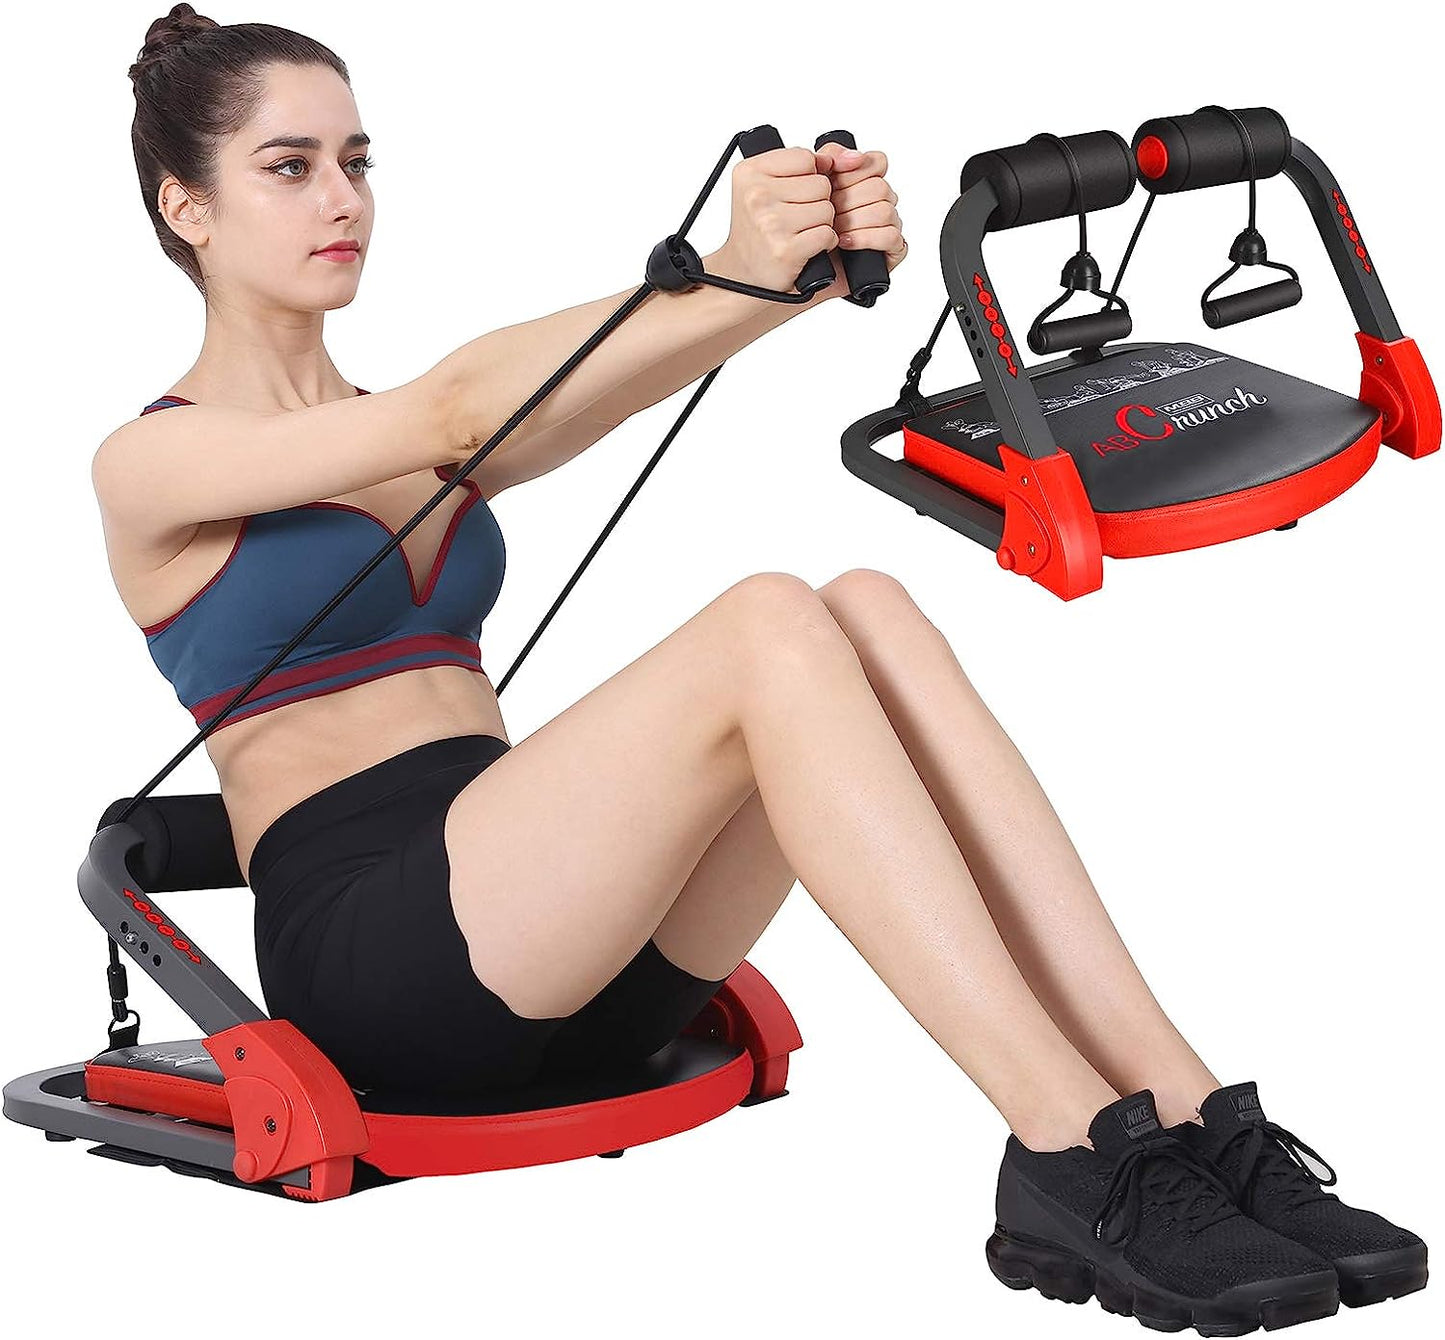 THE NUMBER ONE MBB Ab Crunch Machine,Exercise Equipment for Home Gym Equipment for Strength Training with Resistance Bands, Abs and Total Body Workout,Sole Brand and Patent Owner